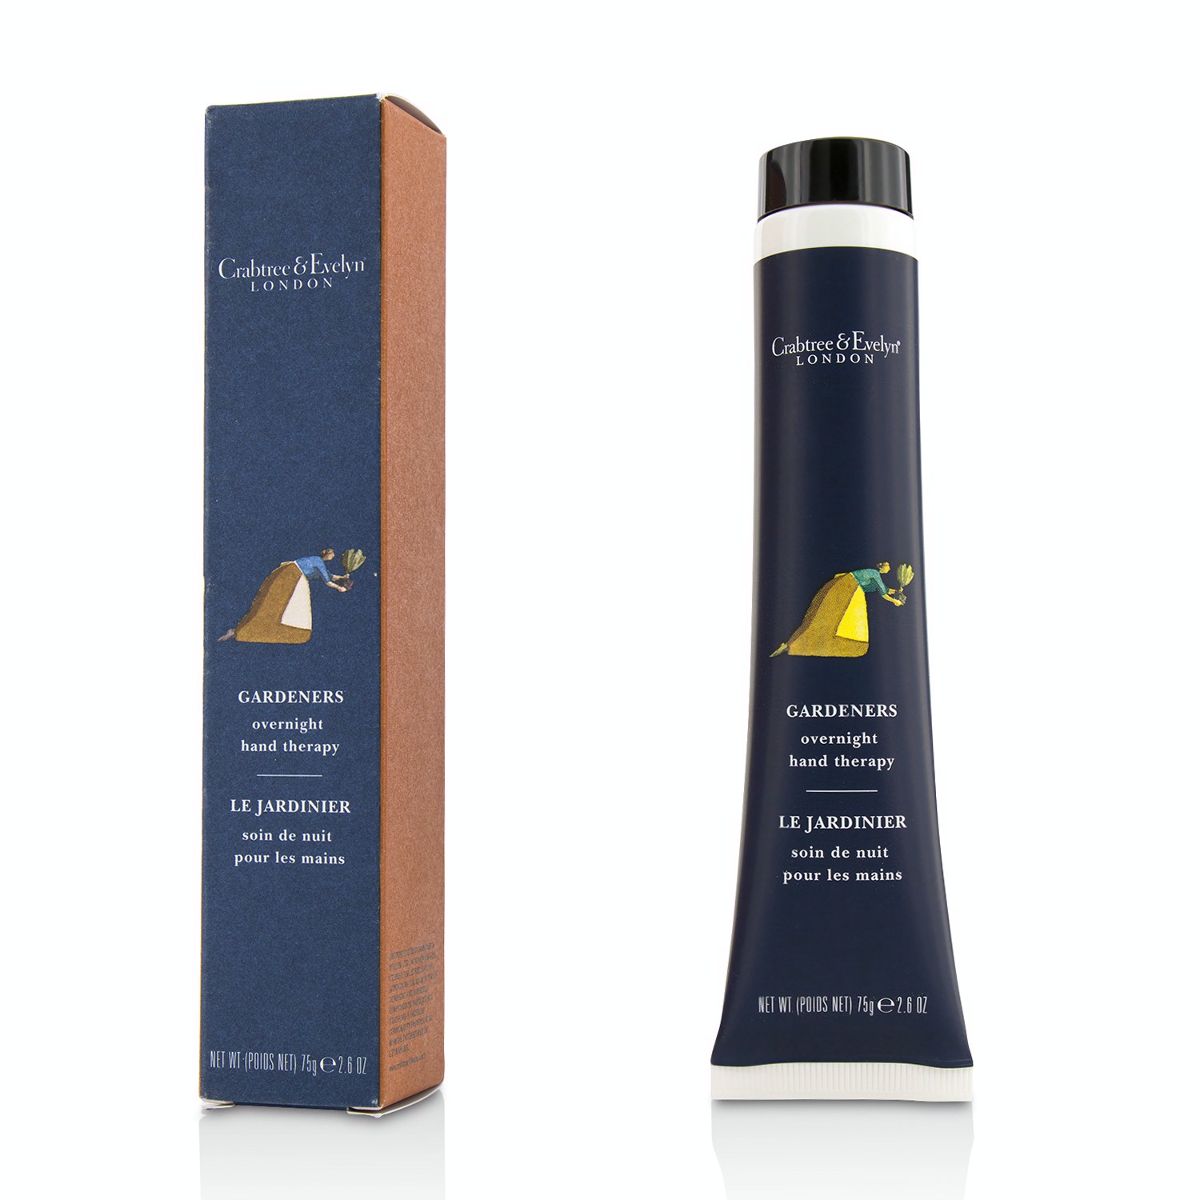 Garderners Overnight Hand Therapy Crabtree & Evelyn Image